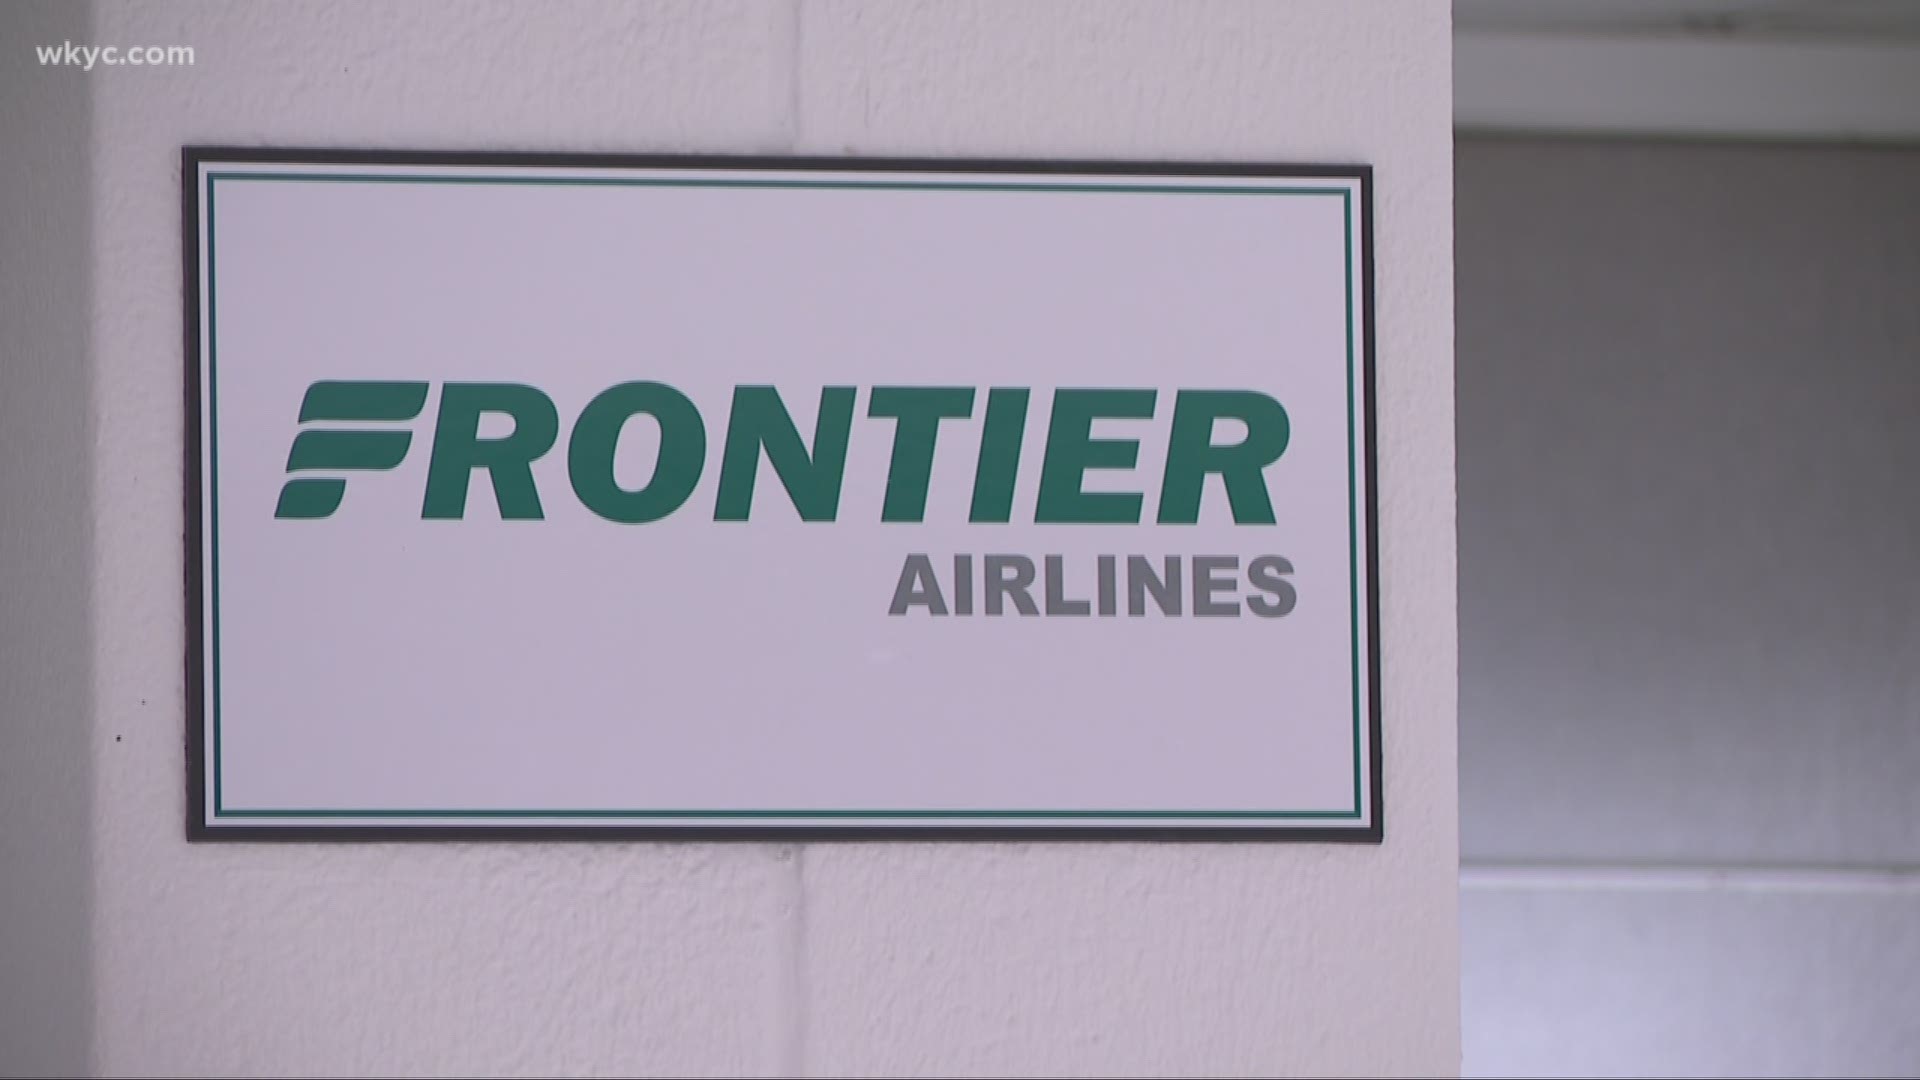 Oct. 10, 2018: Per Frontier's rules, all rodents, including squirrels, are not allowed on flights.